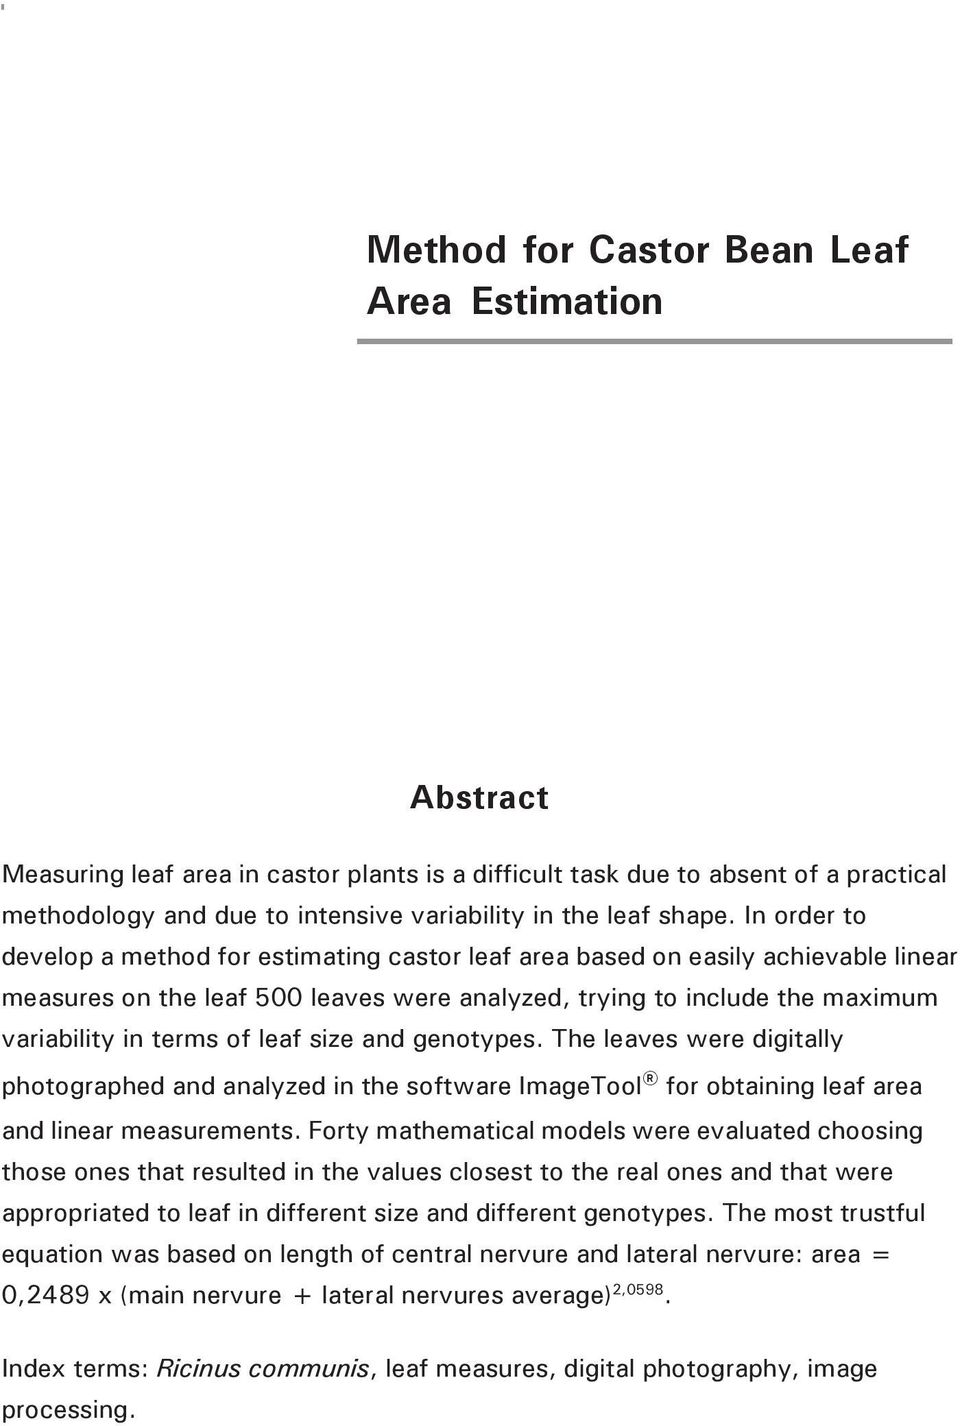 In order to develop a method for estimating castor leaf area based on easily achievable linear measures on the leaf 500 leaves were analyzed, trying to include the maximum variability in terms of